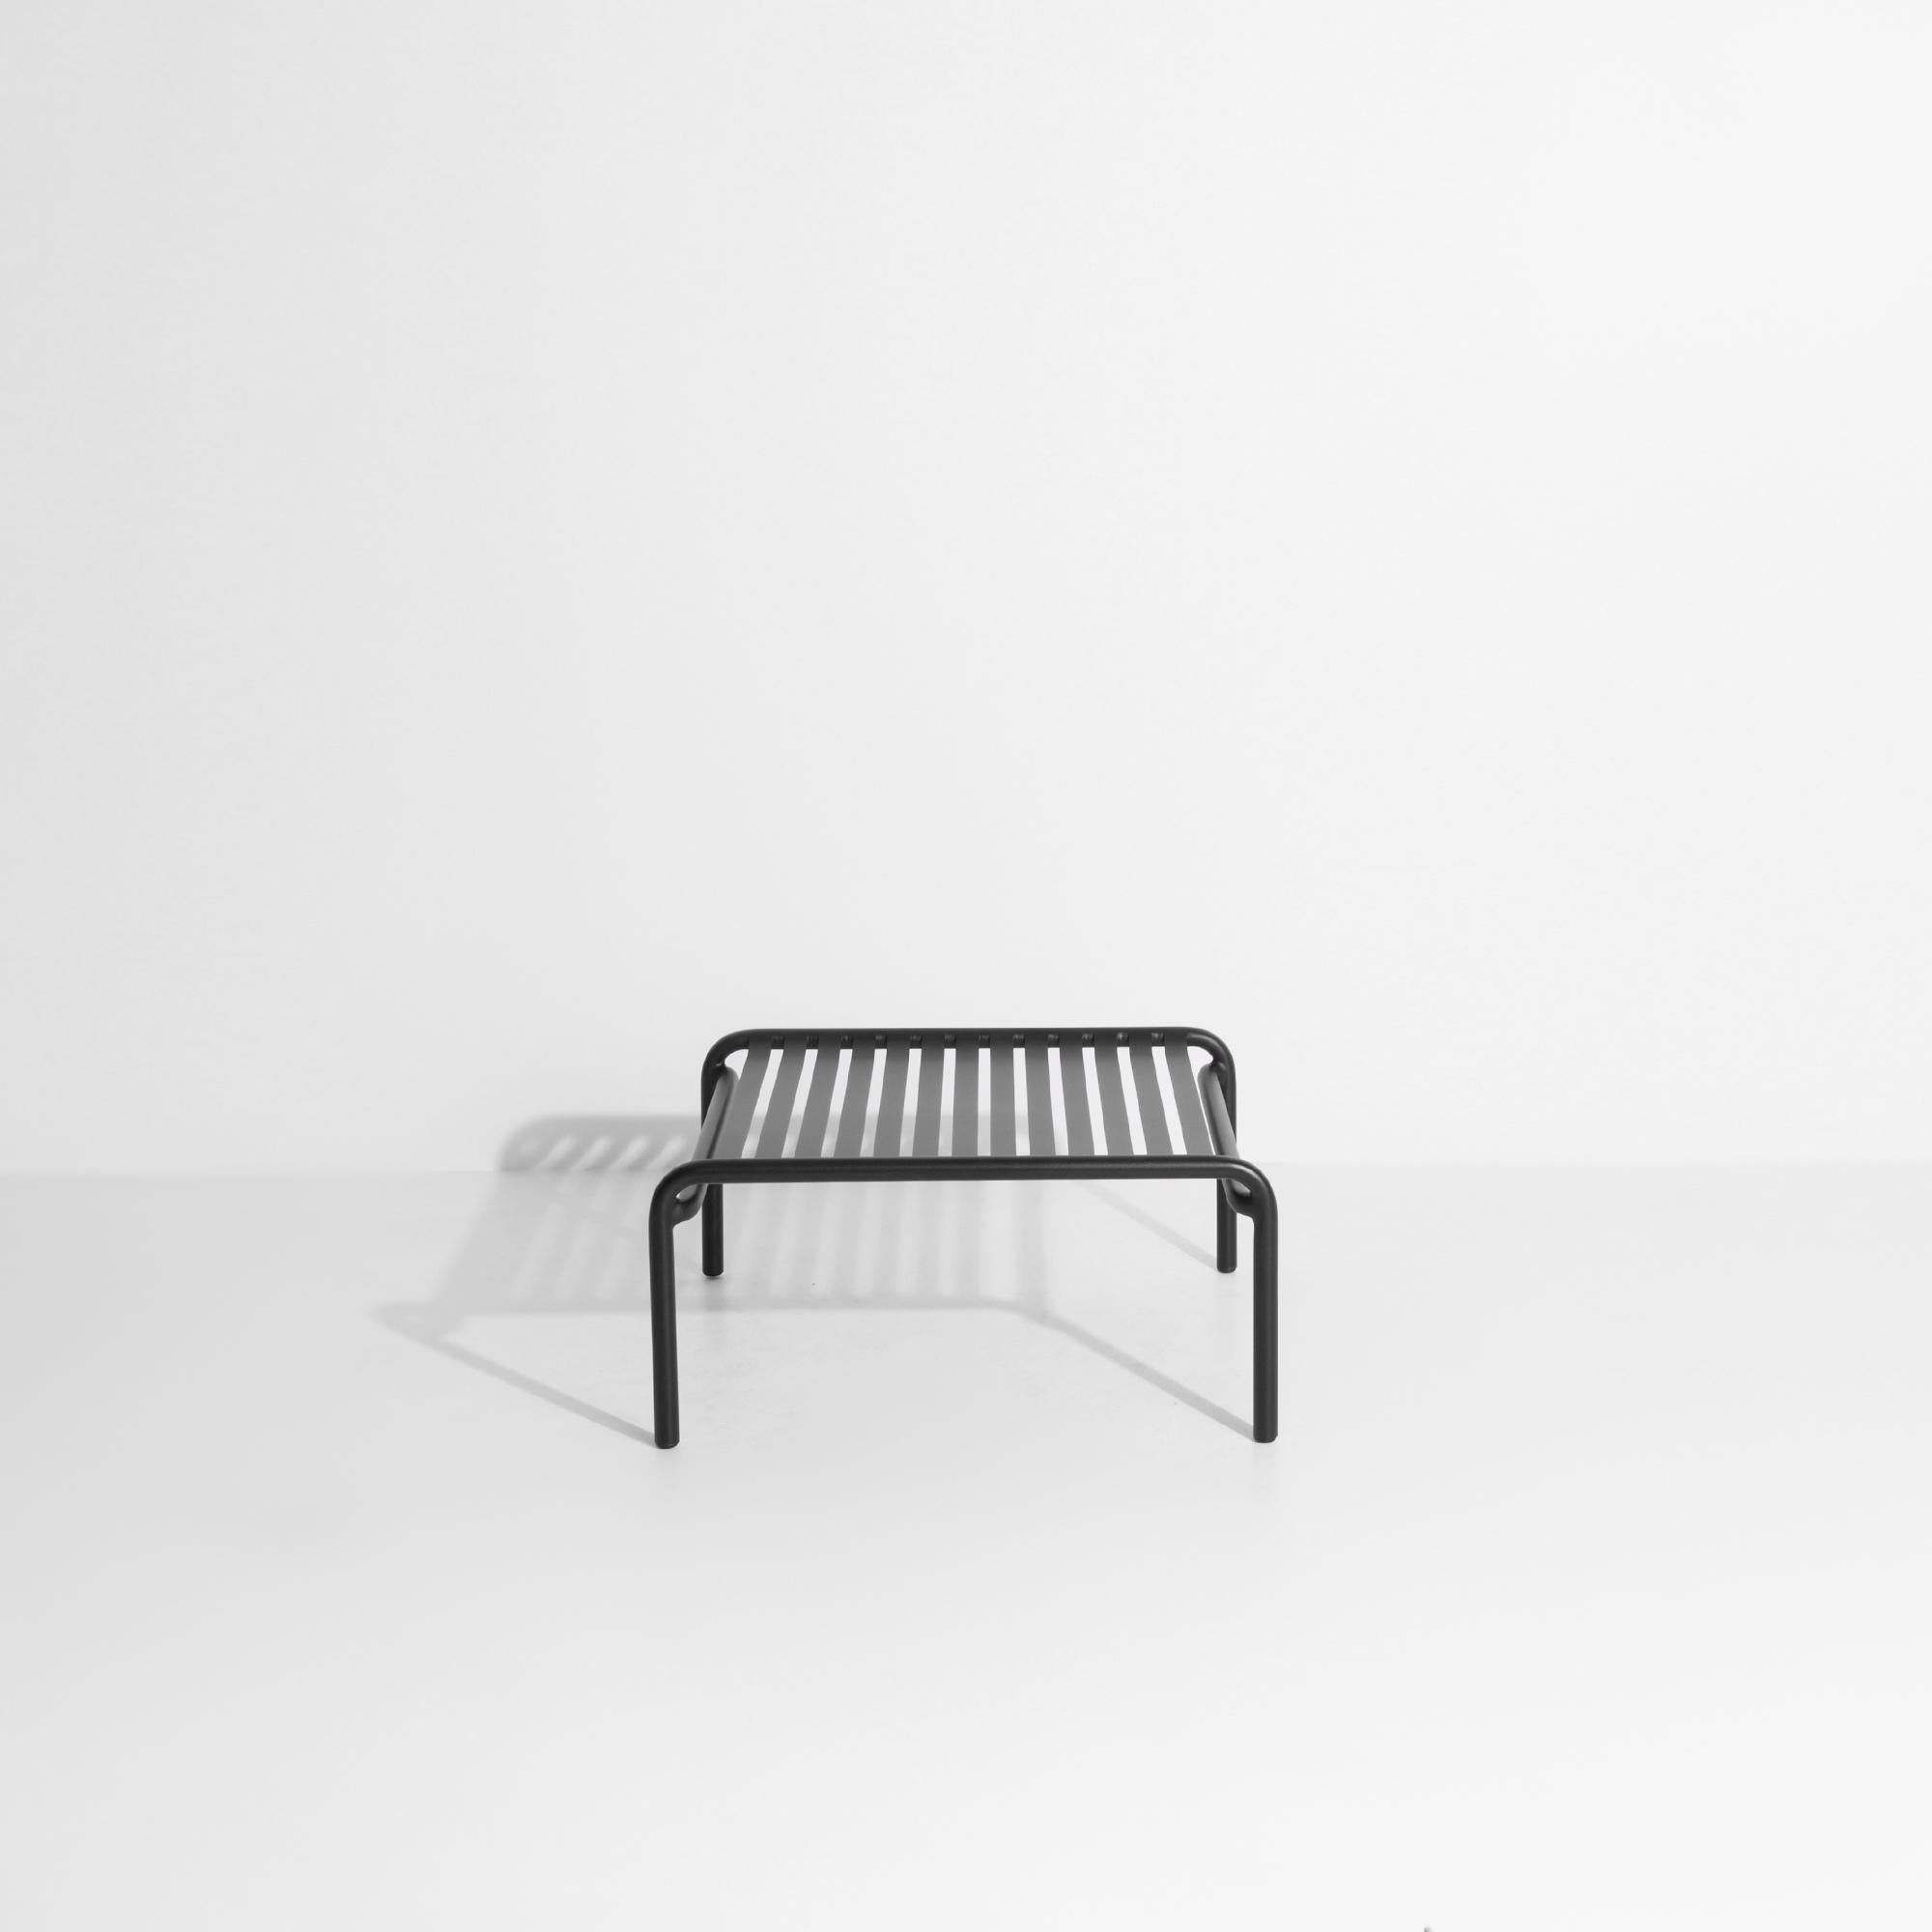 Chinese Petite Friture Week-End Coffee Table in Black Aluminium by Studio BrichetZiegler For Sale